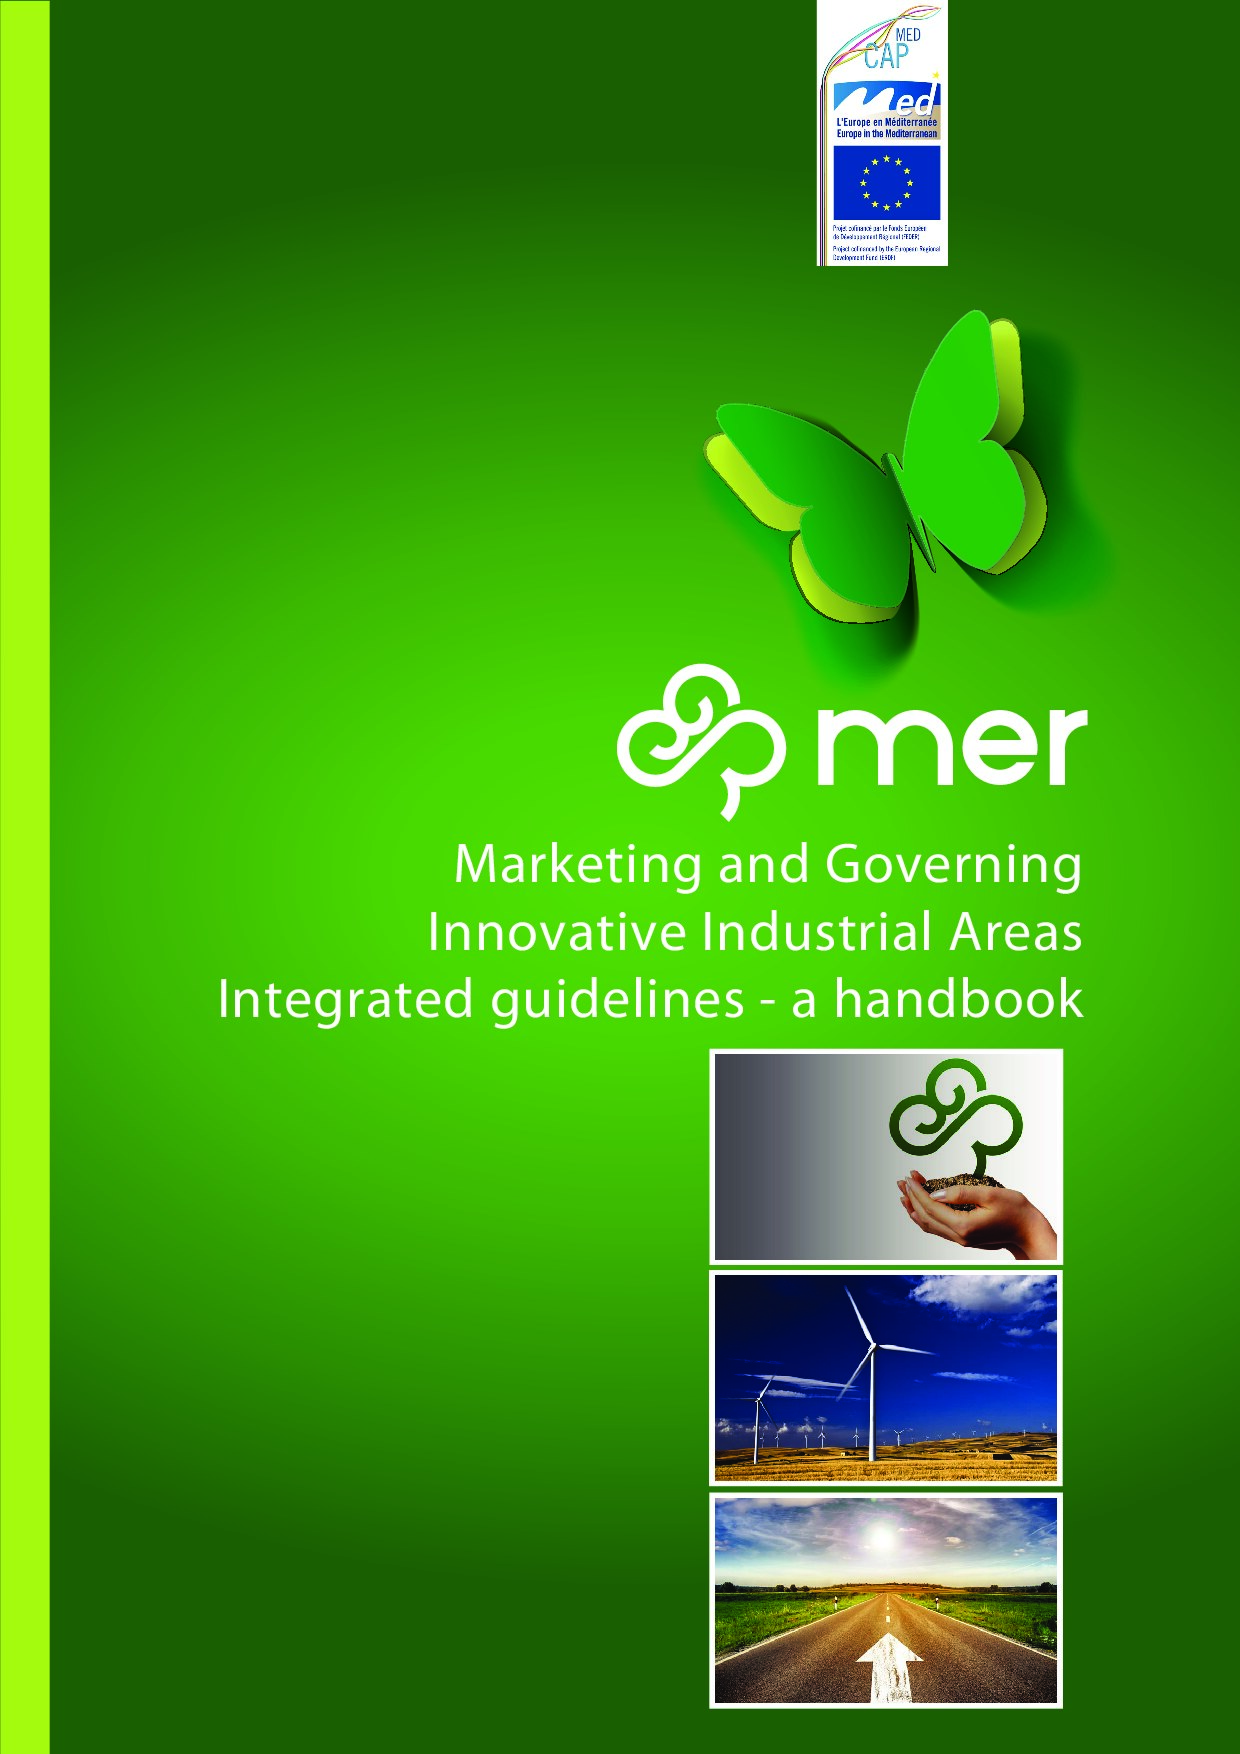 Marketing and Governing Innovative Industrial Areas Integrated guidelines (1)